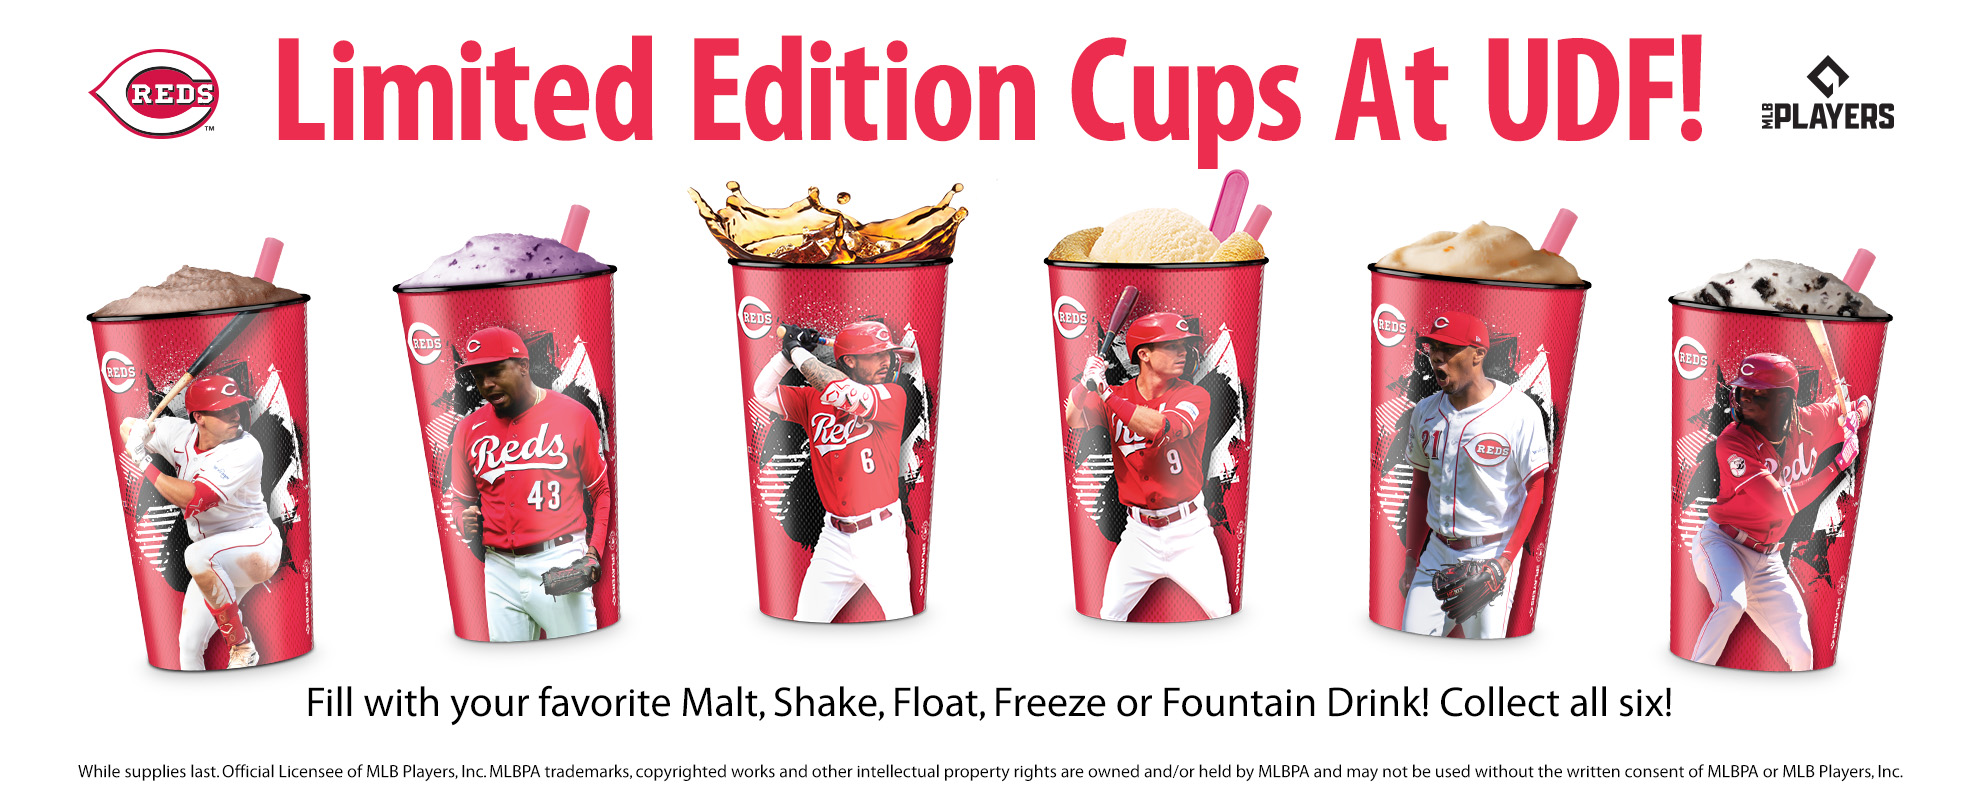 Limited Edition Reds Cups at UDF